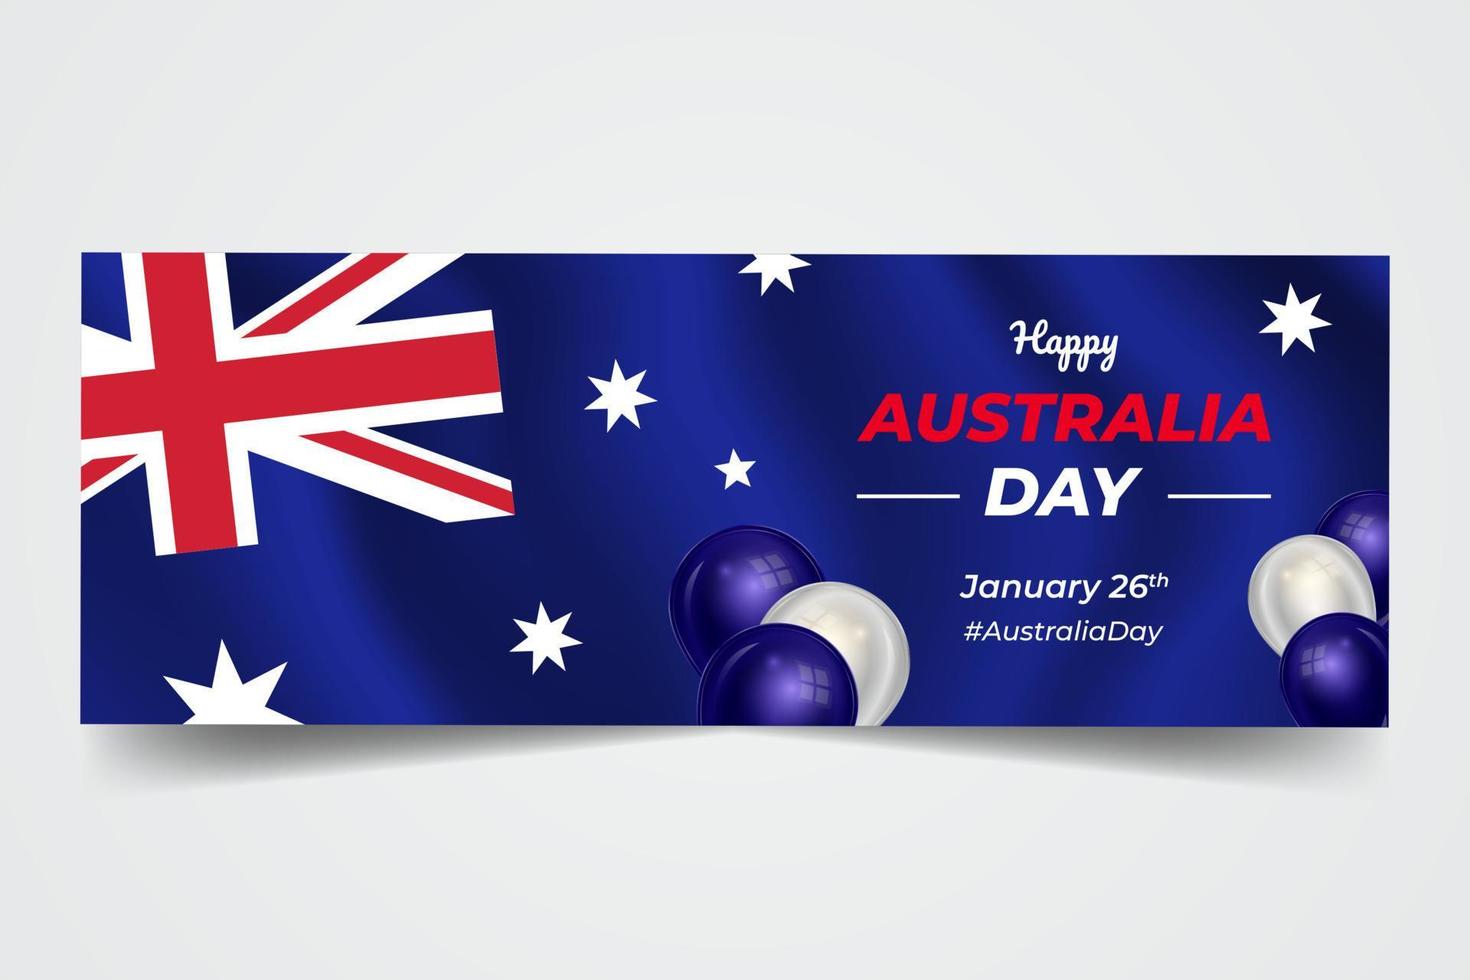 Happy Australia Day January 26th banner with balloon illustration on waving flag background vector